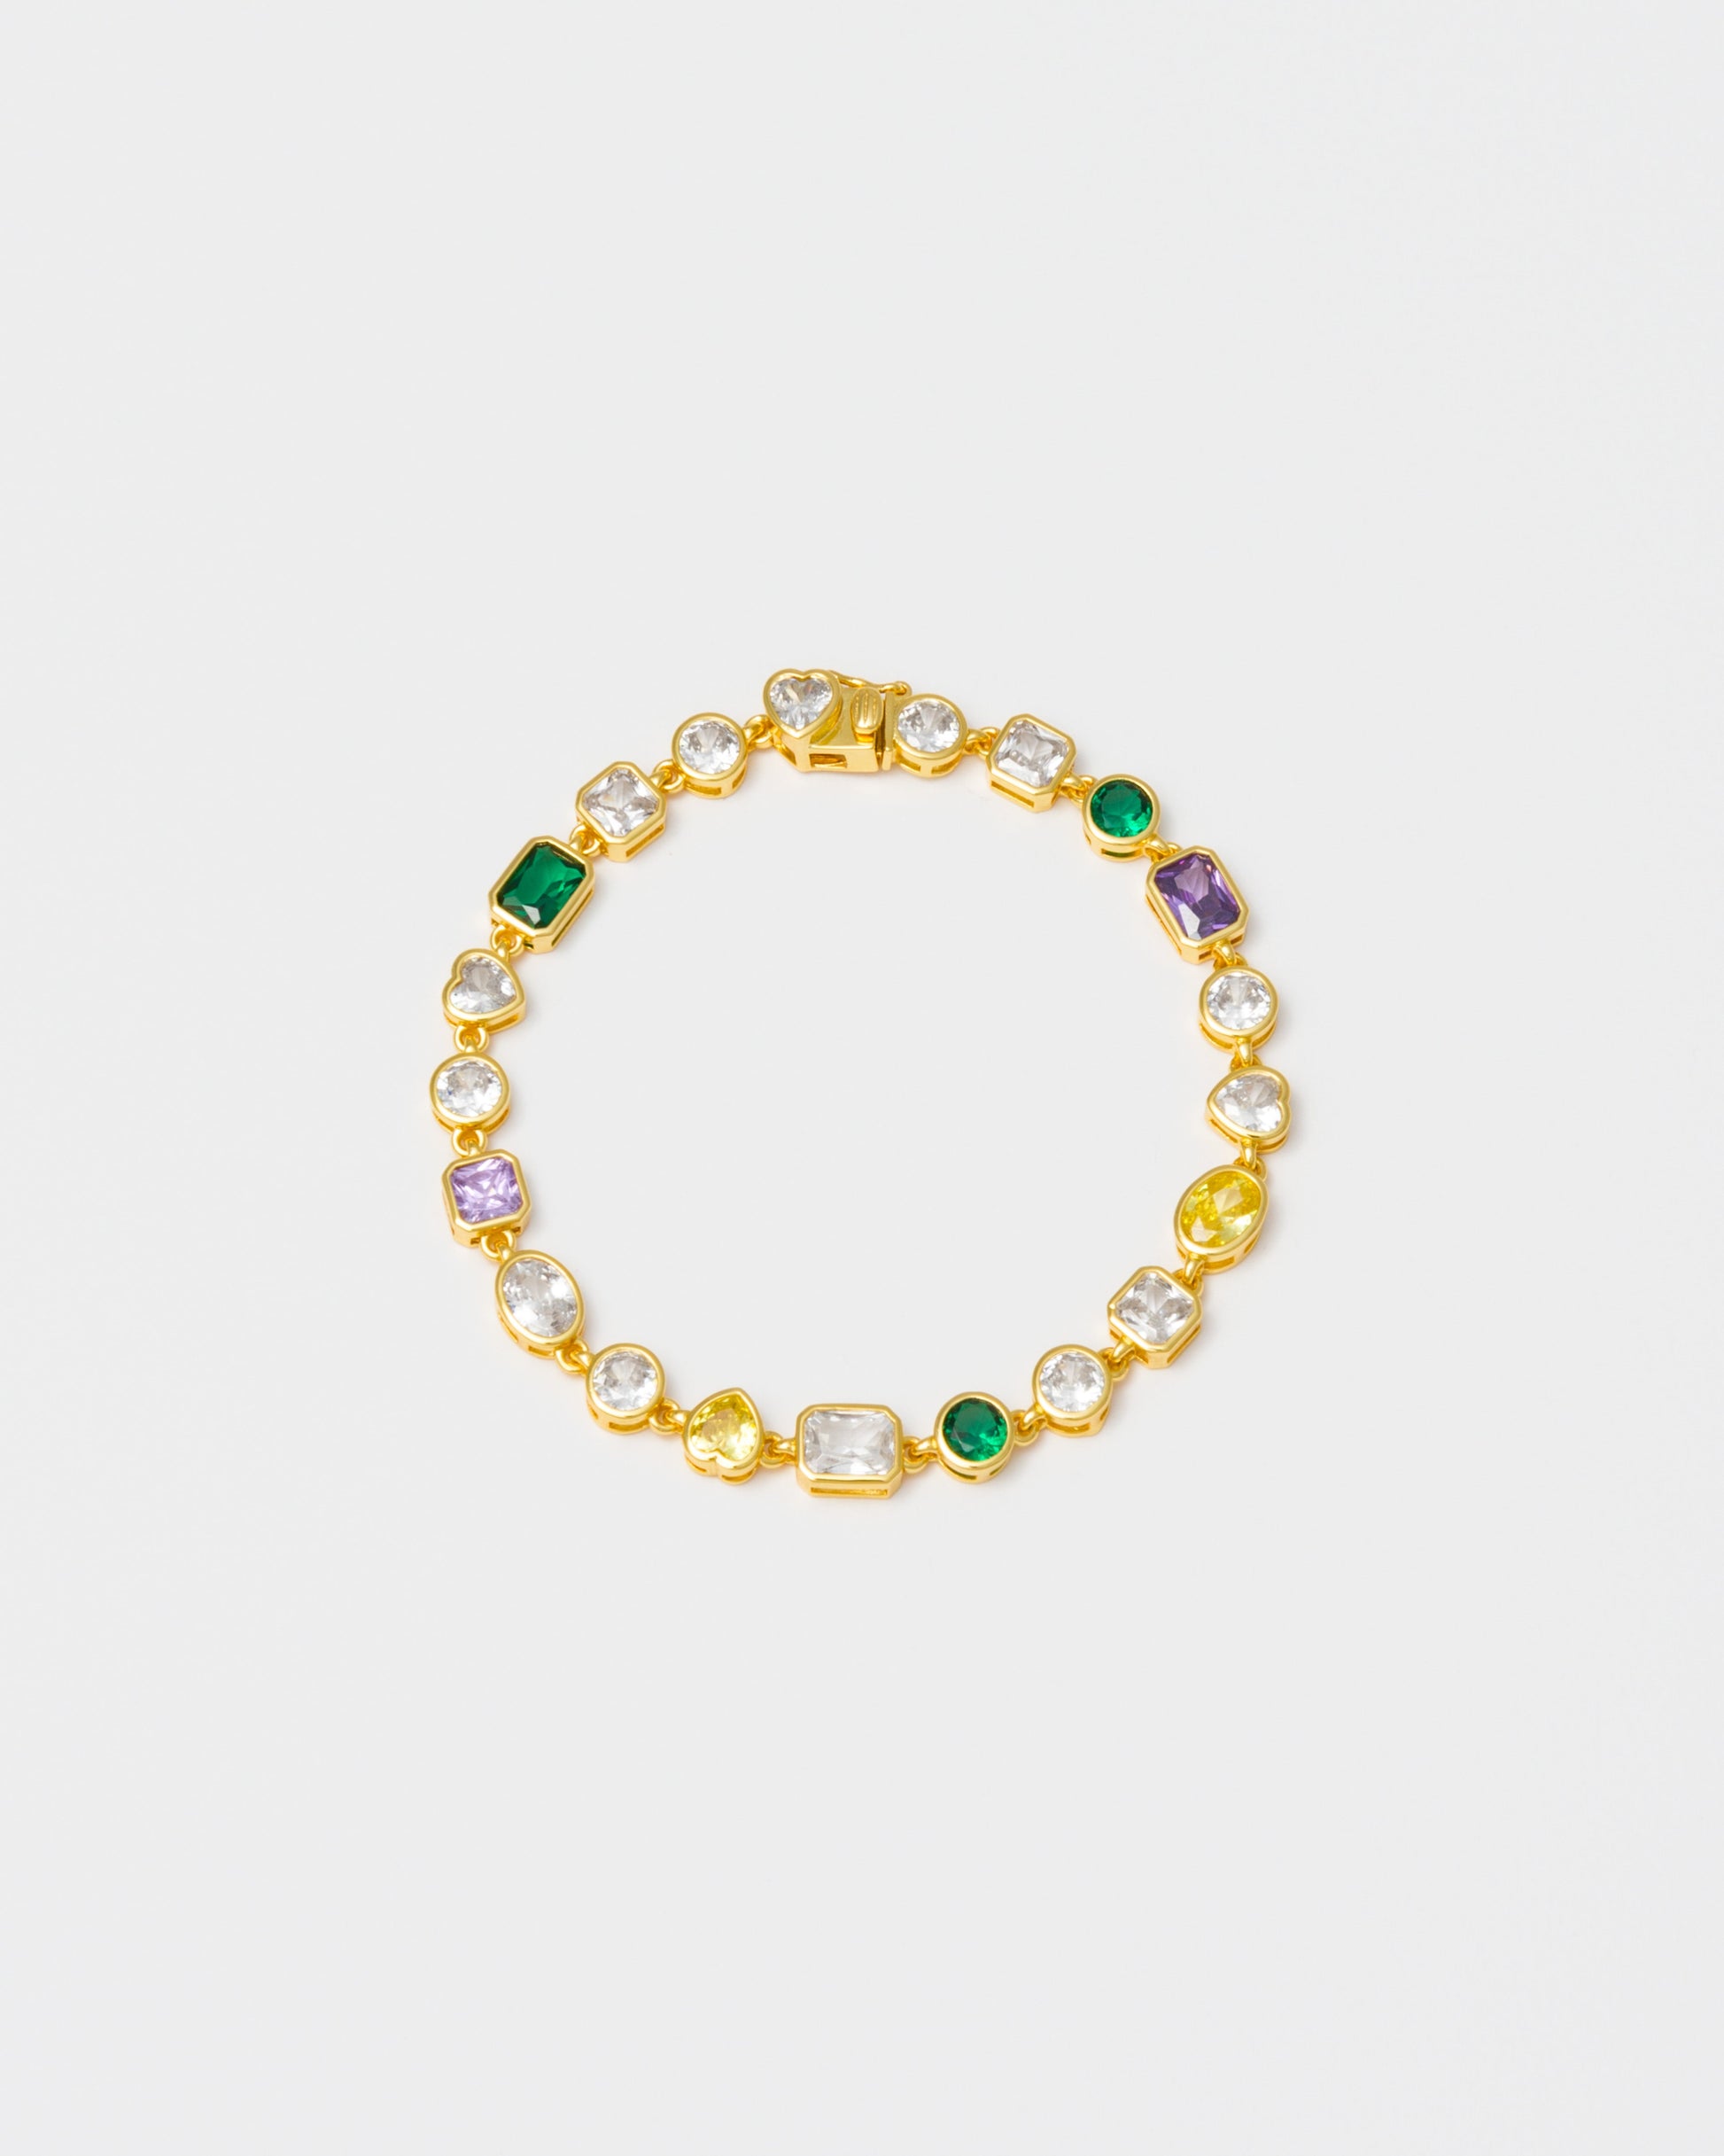 18k yellow gold coated mixed bezels chain bracelet with hand-set stones in different shapes and colors. Mix of rectangular, square, round and heart-shaped stones in white, amethyst, emerald green and golden yellow